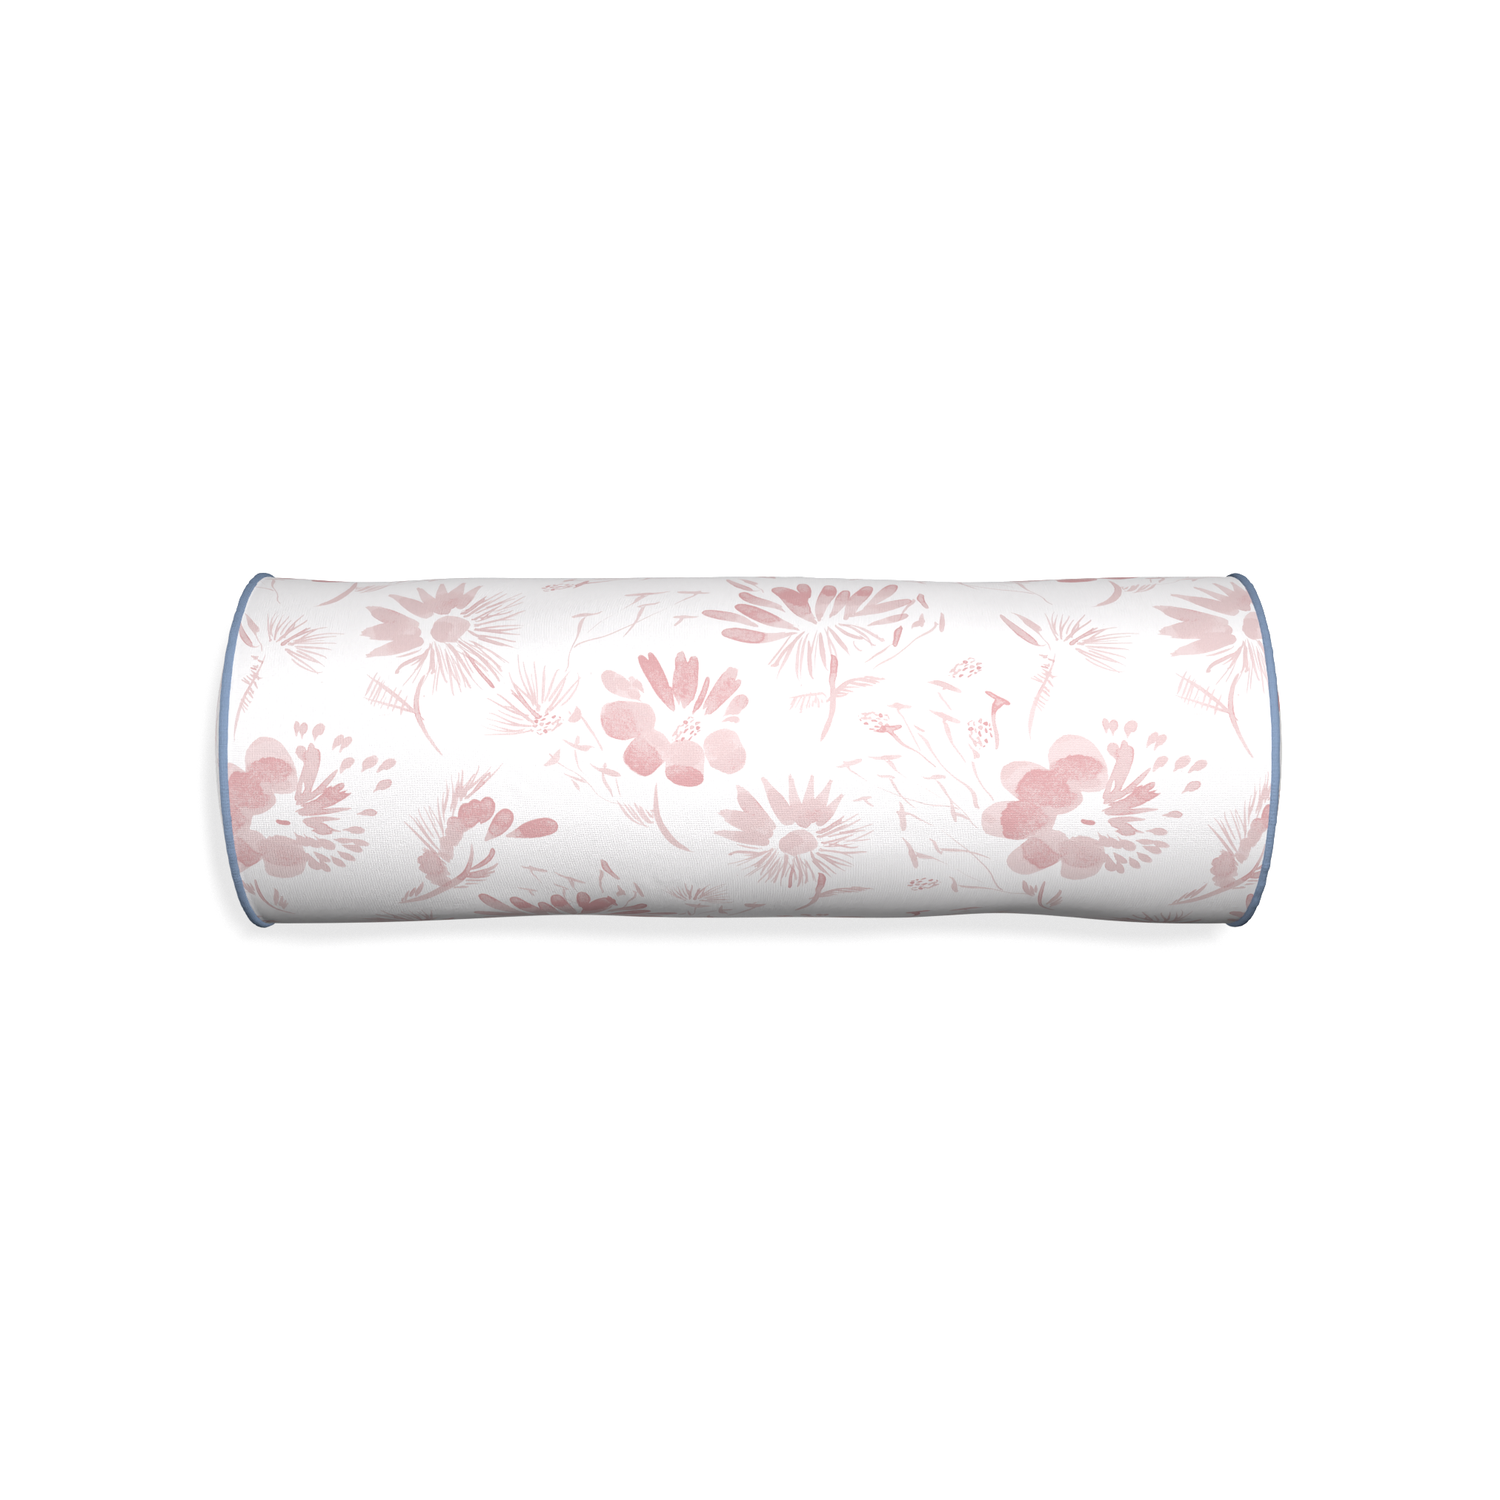 Bolster blake custom pink floralpillow with sky piping on white background